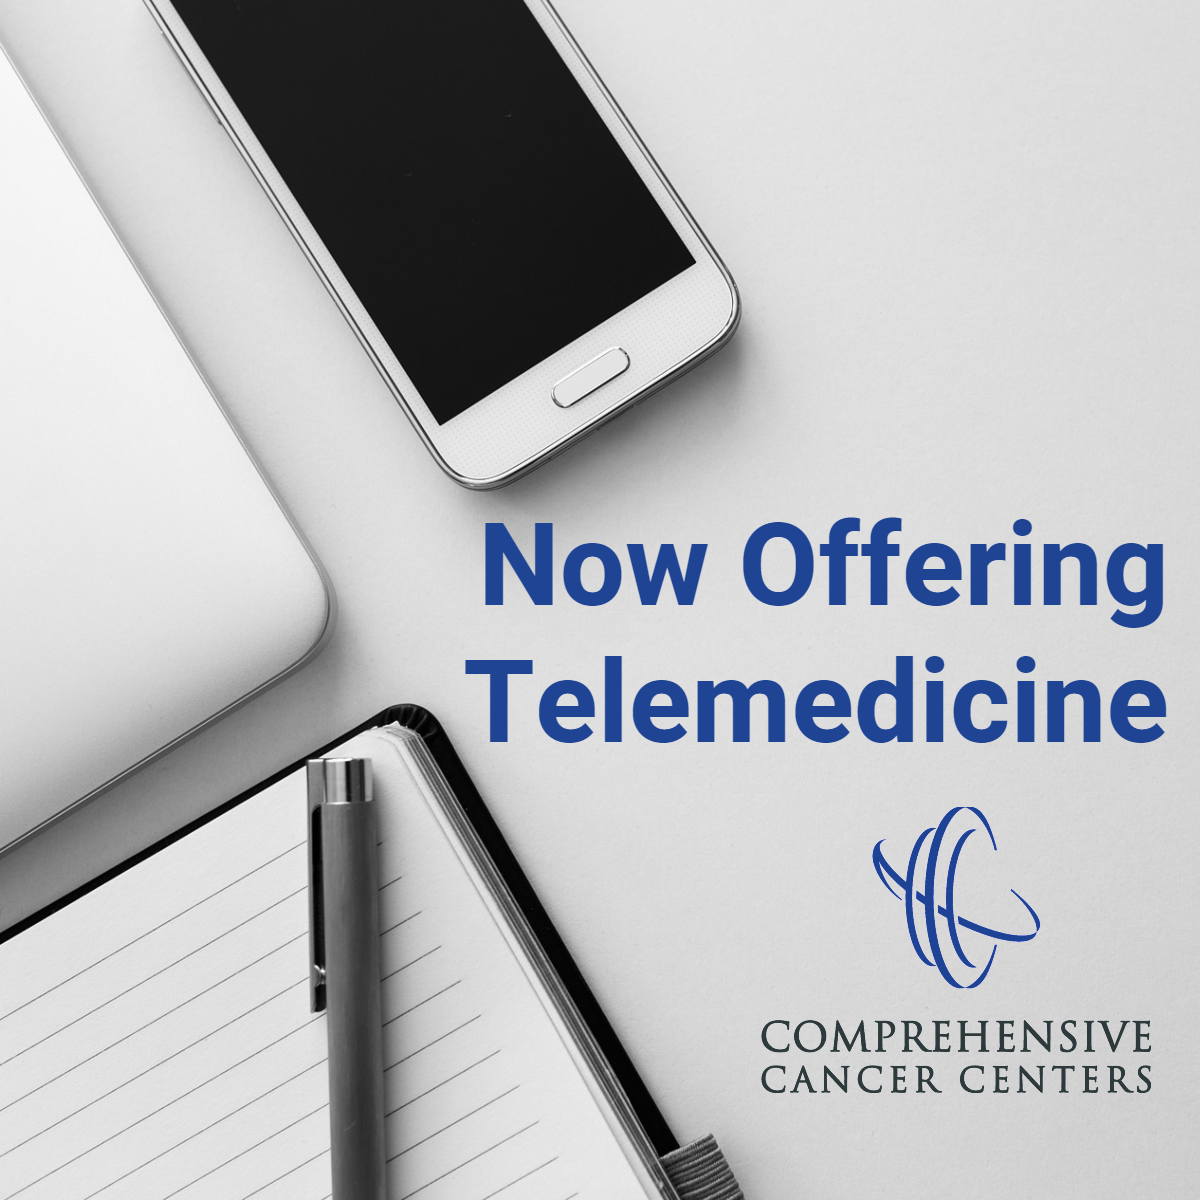 Using Telemedicine for Cancer Care During COVID-19